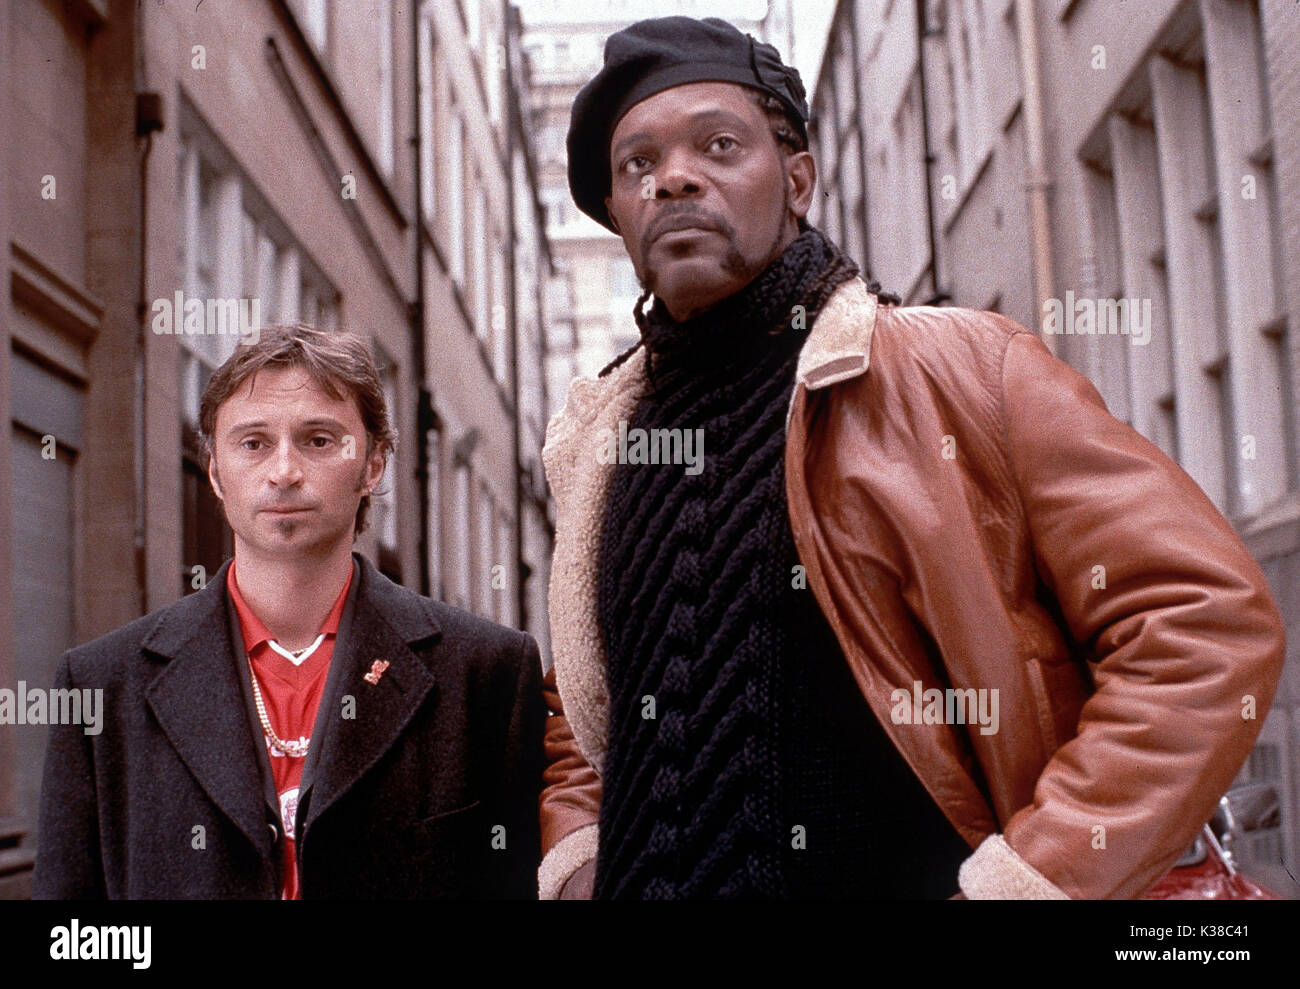 THE 51ST STATE ROBERT CARLYLE AND SAMUEL L JACKSON A FIFTY FIRST PRODUCTION     Date: 2001 Stock Photo